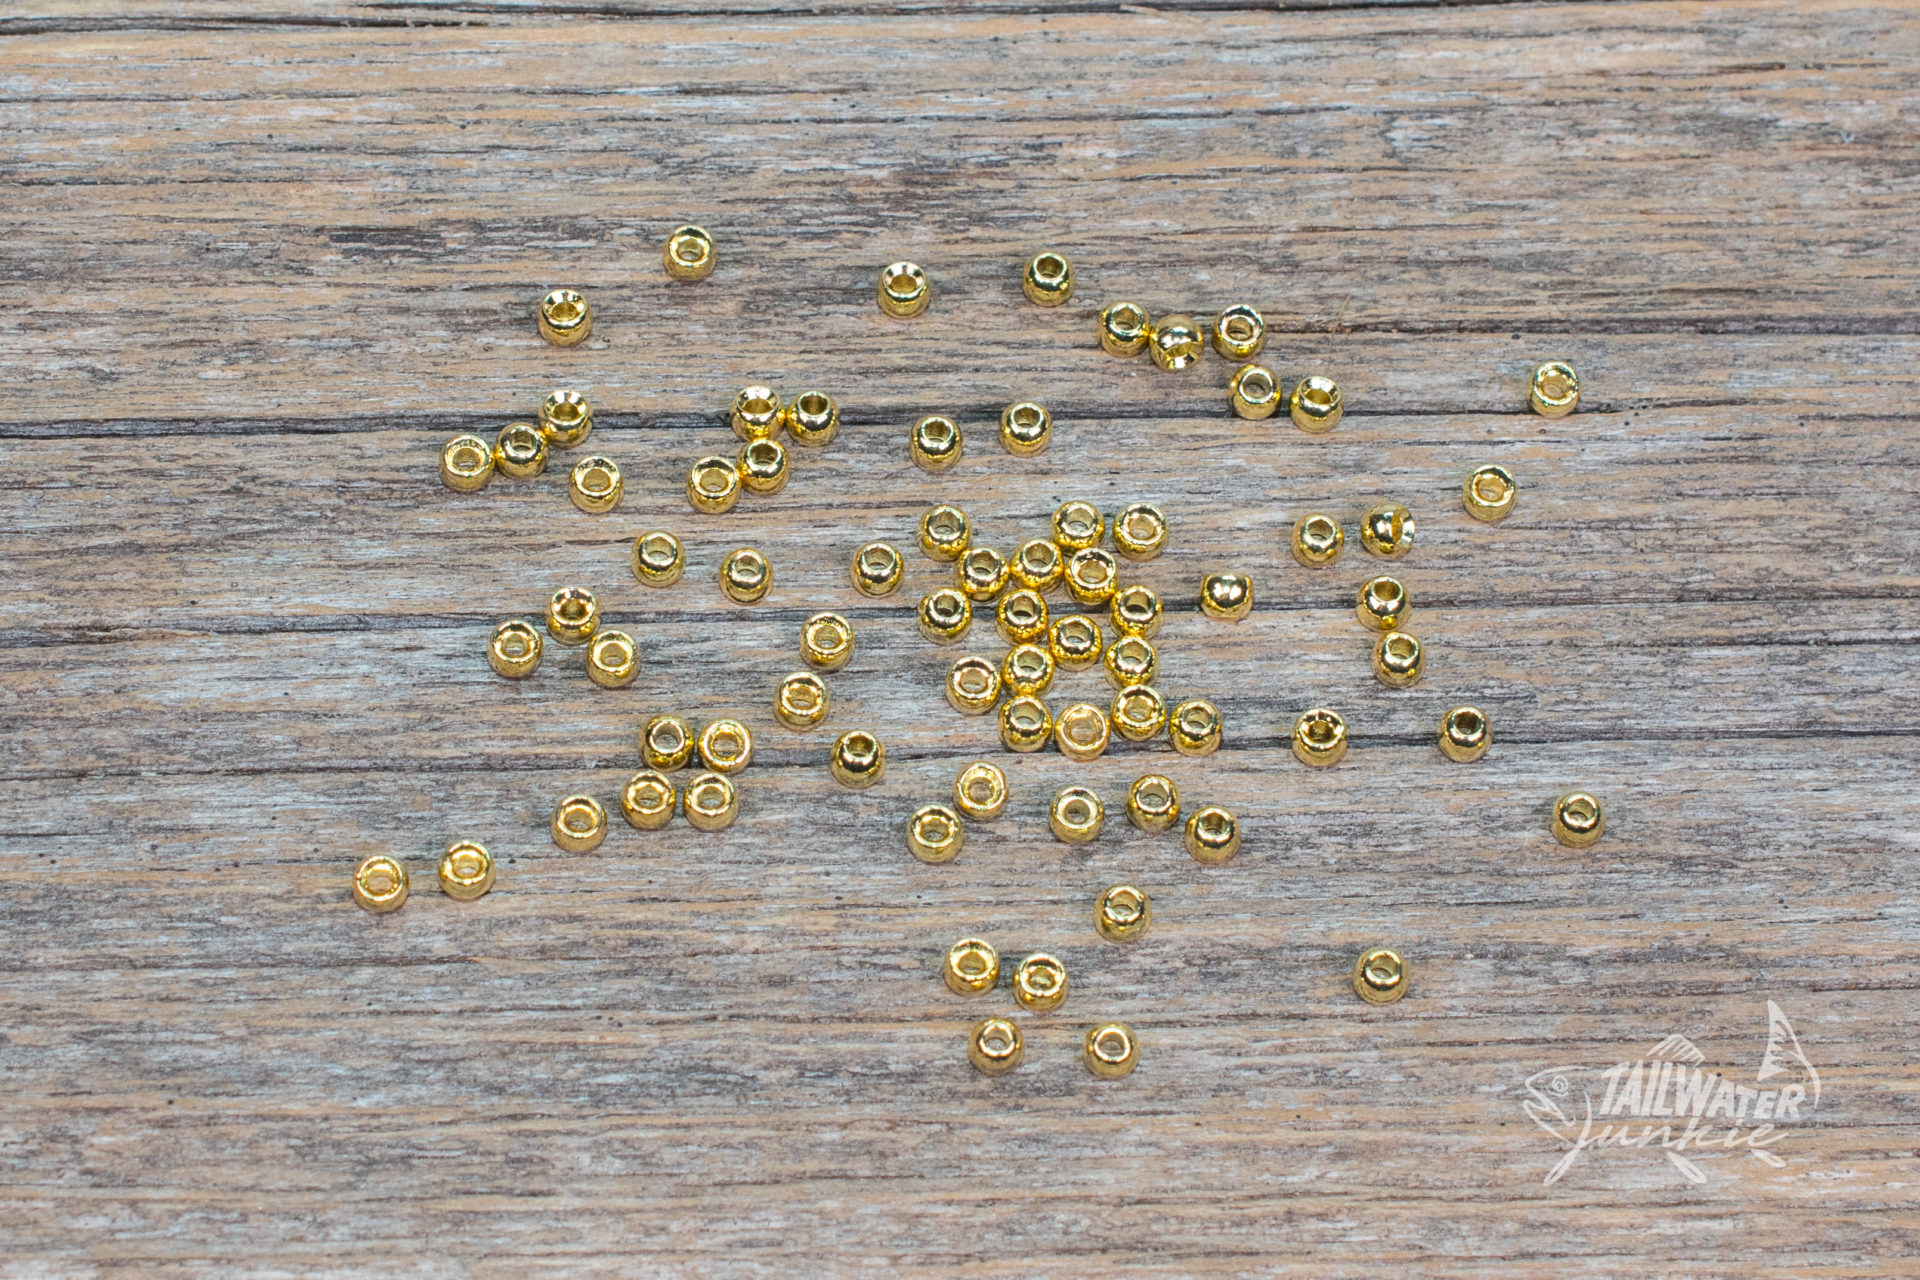 8 SIZES TO PICK FROM 100 COUNT PREMIUM GOLD BRASS BEADS FOR FLY TYING 